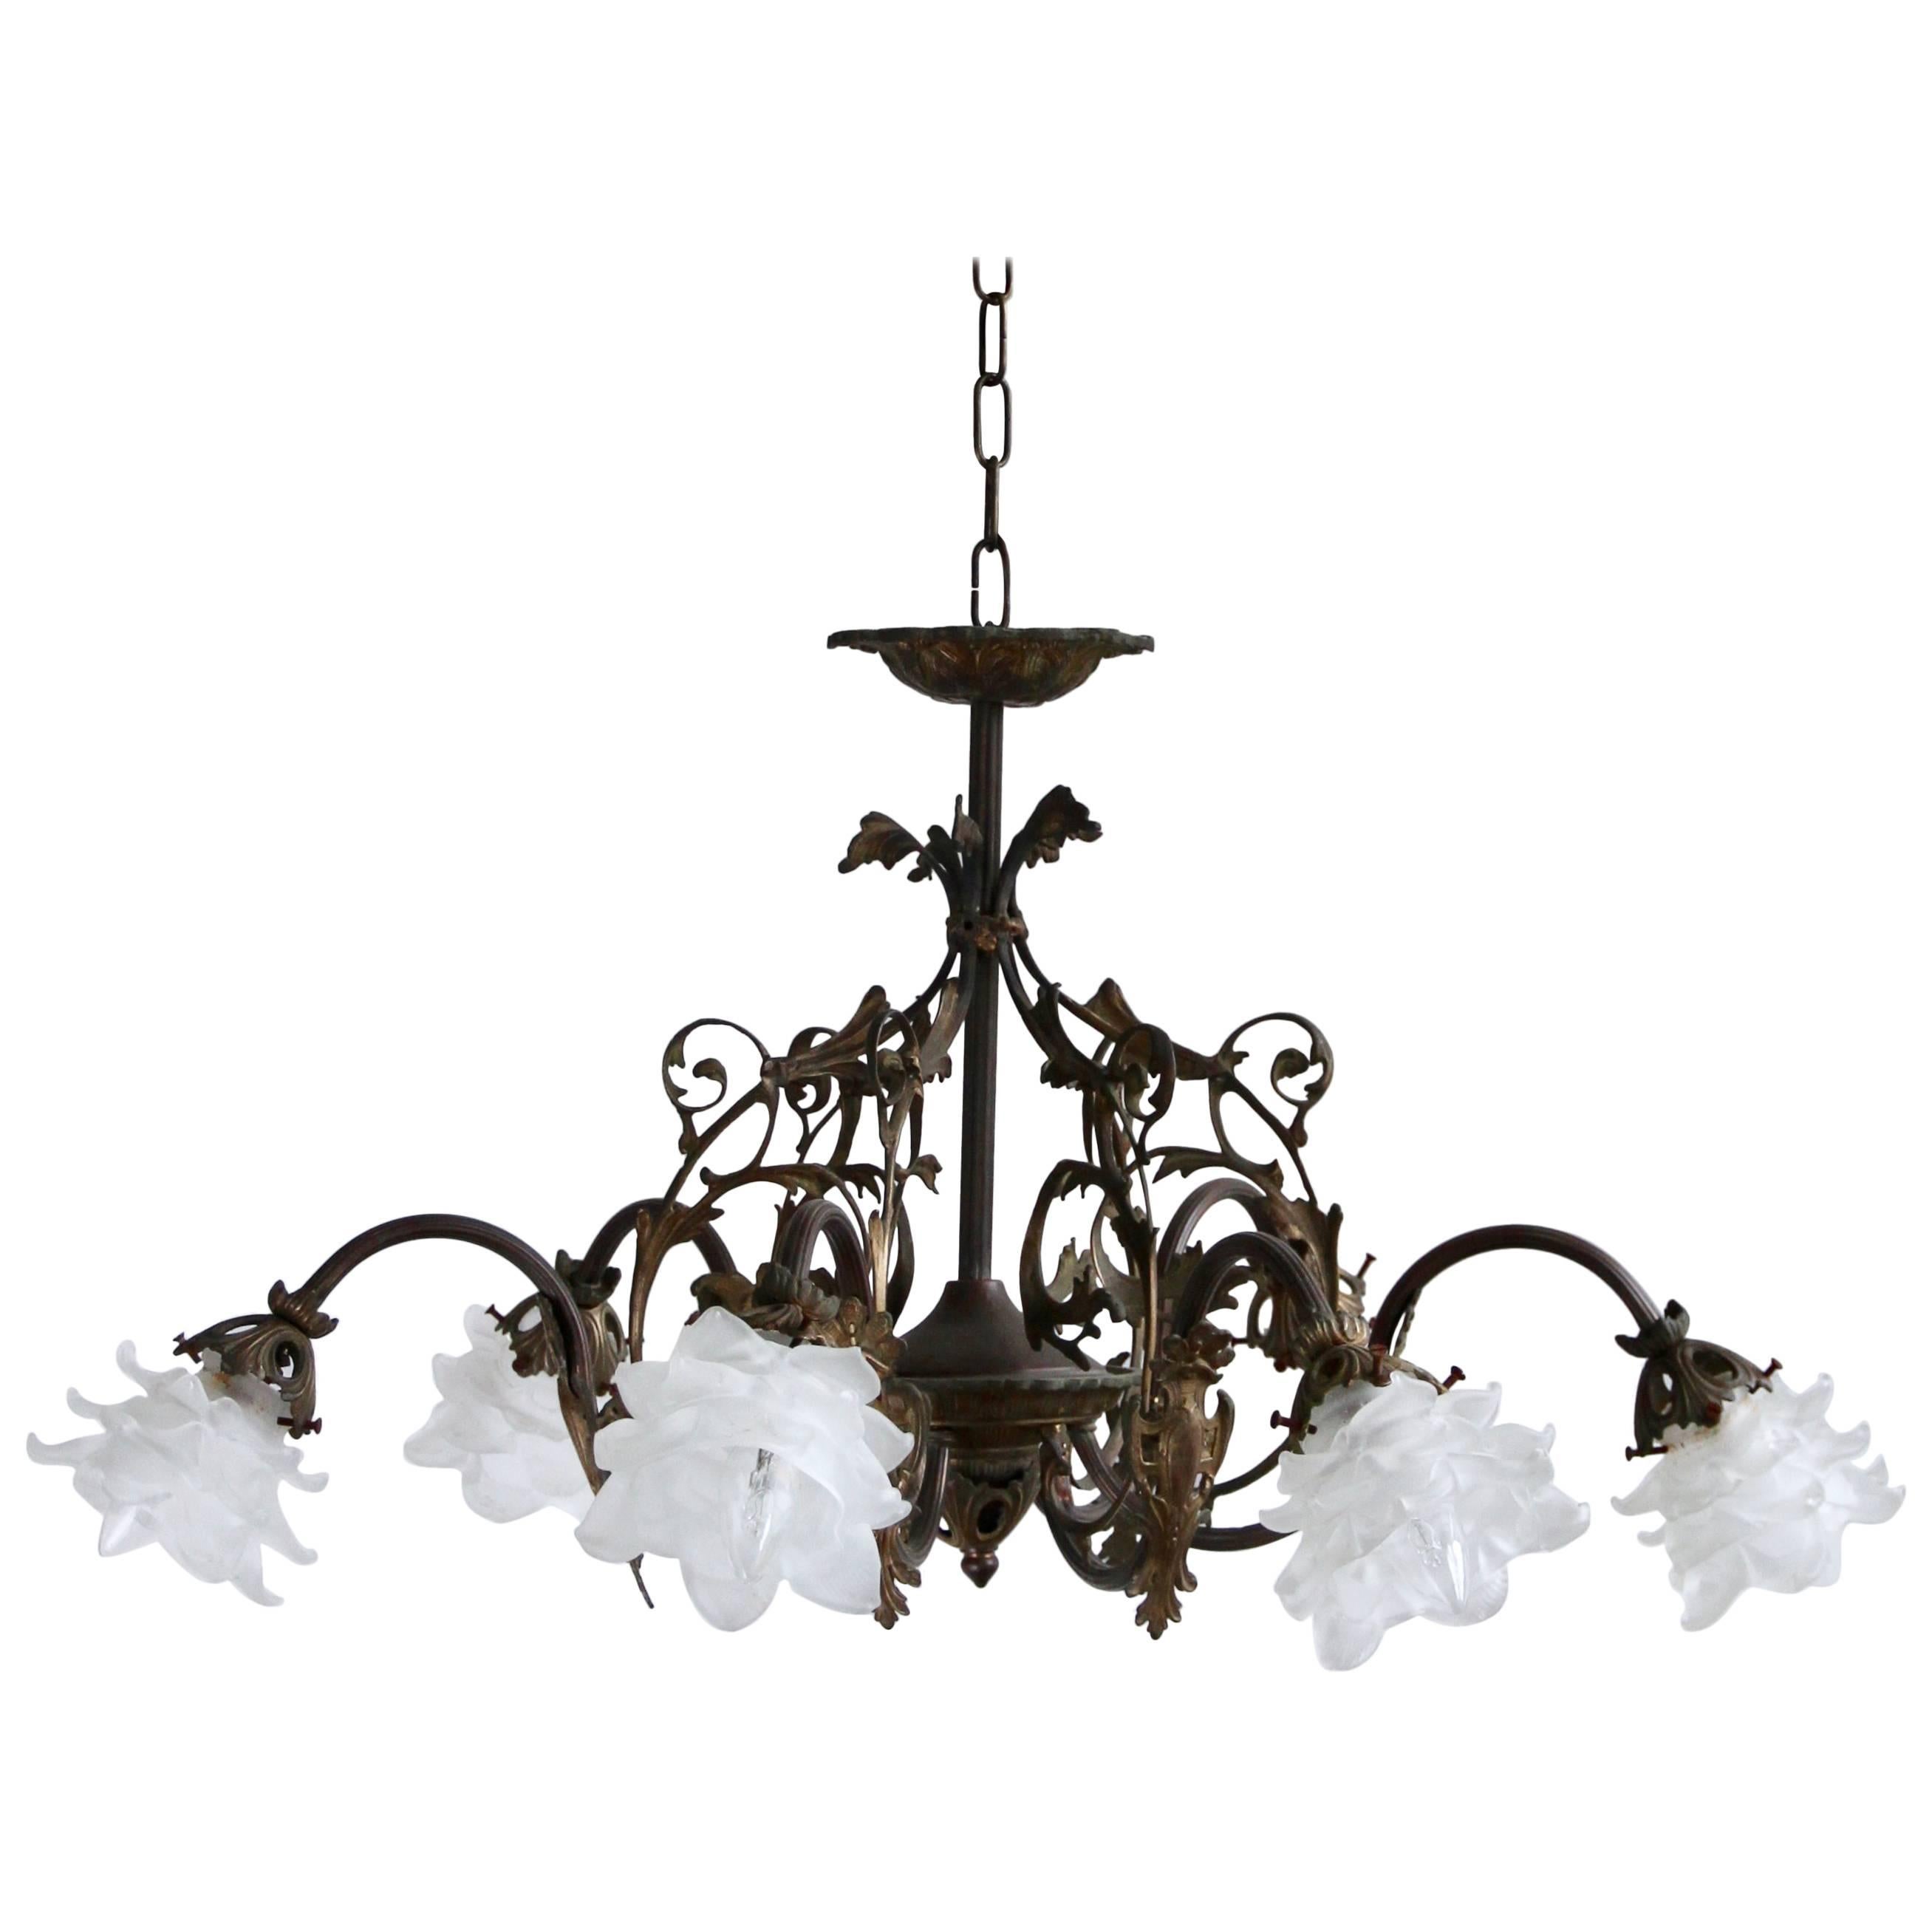 1920s Decorative Brass Downlighter Chandelier with Frosted Floral Shades